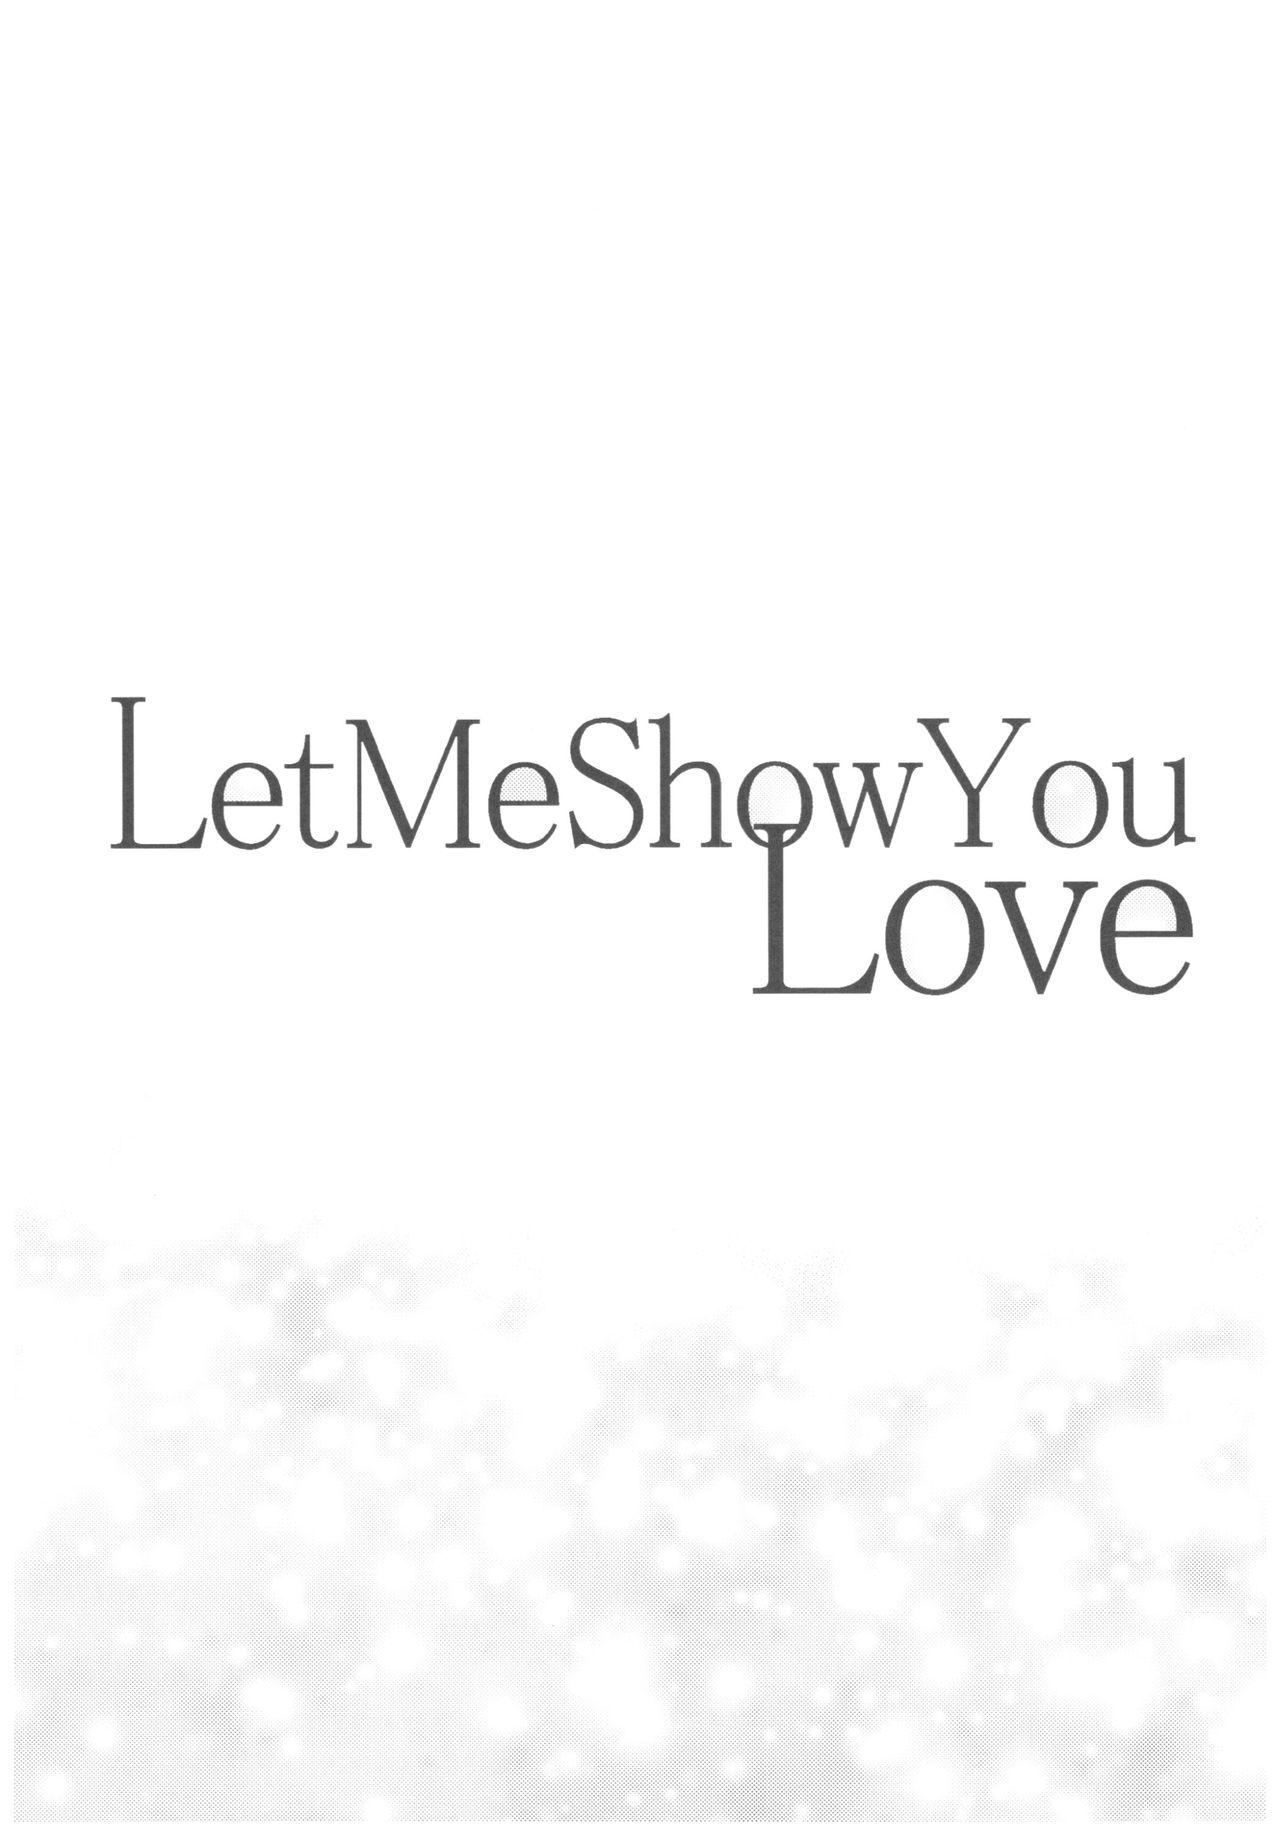 Let me show you Love 44